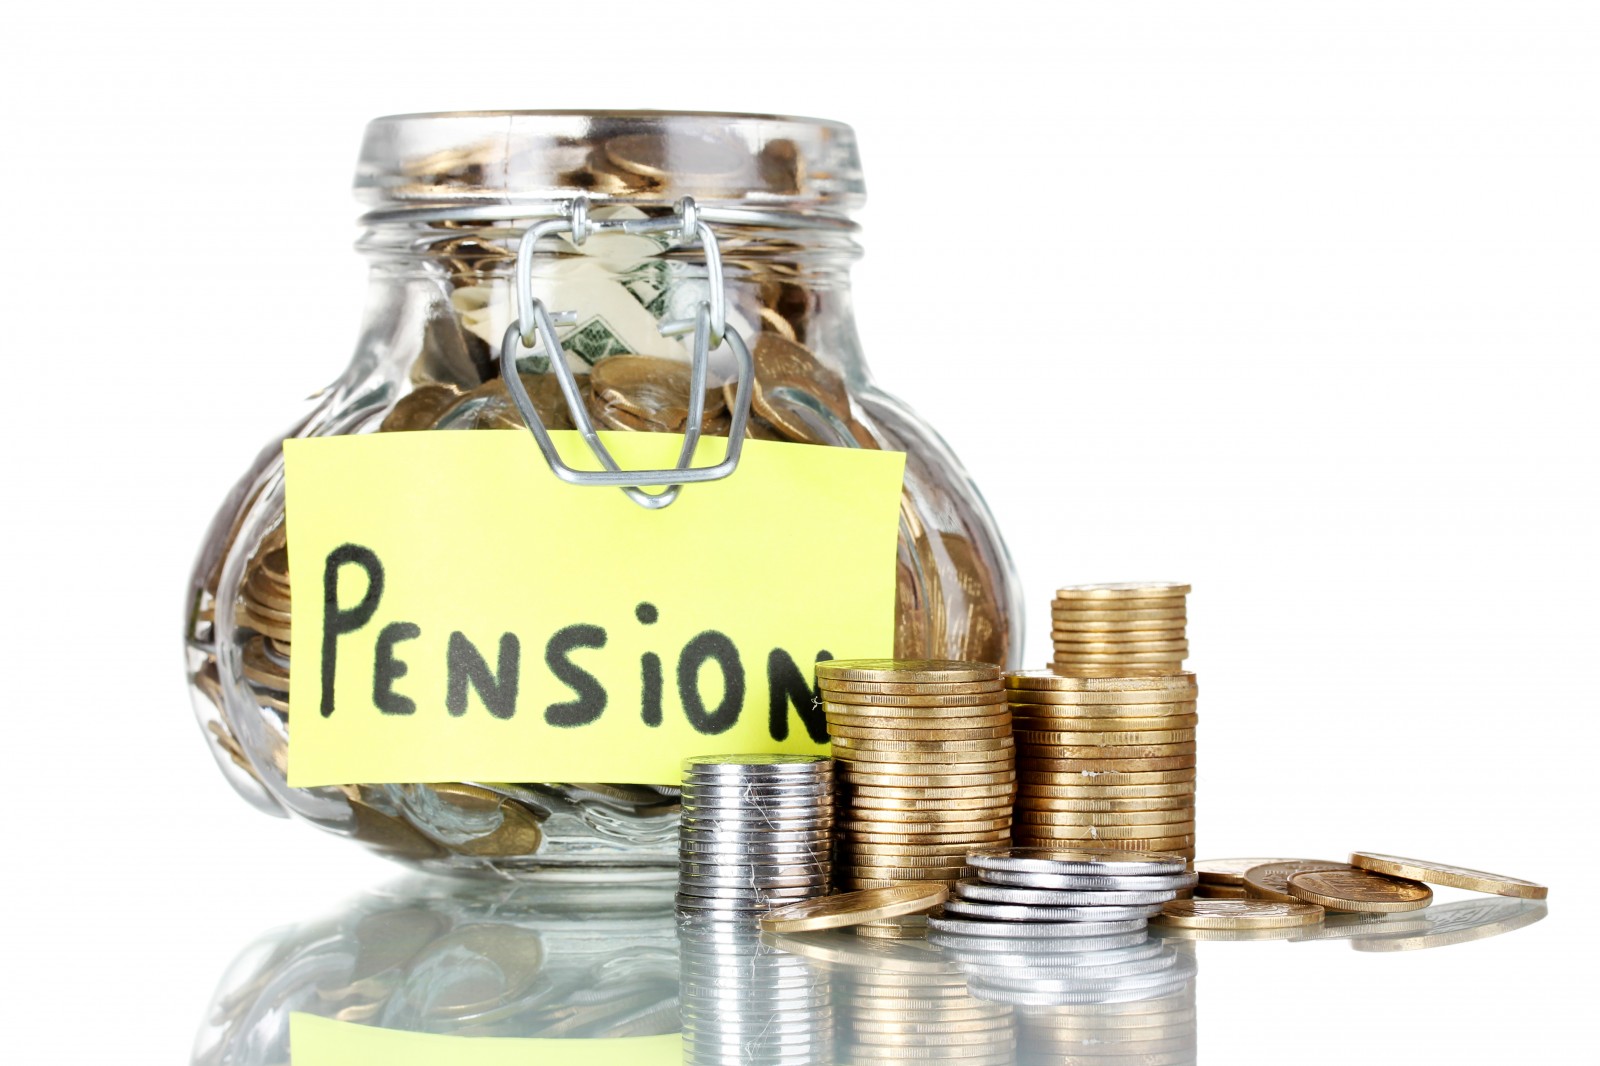 Let’s take pensions seriously 